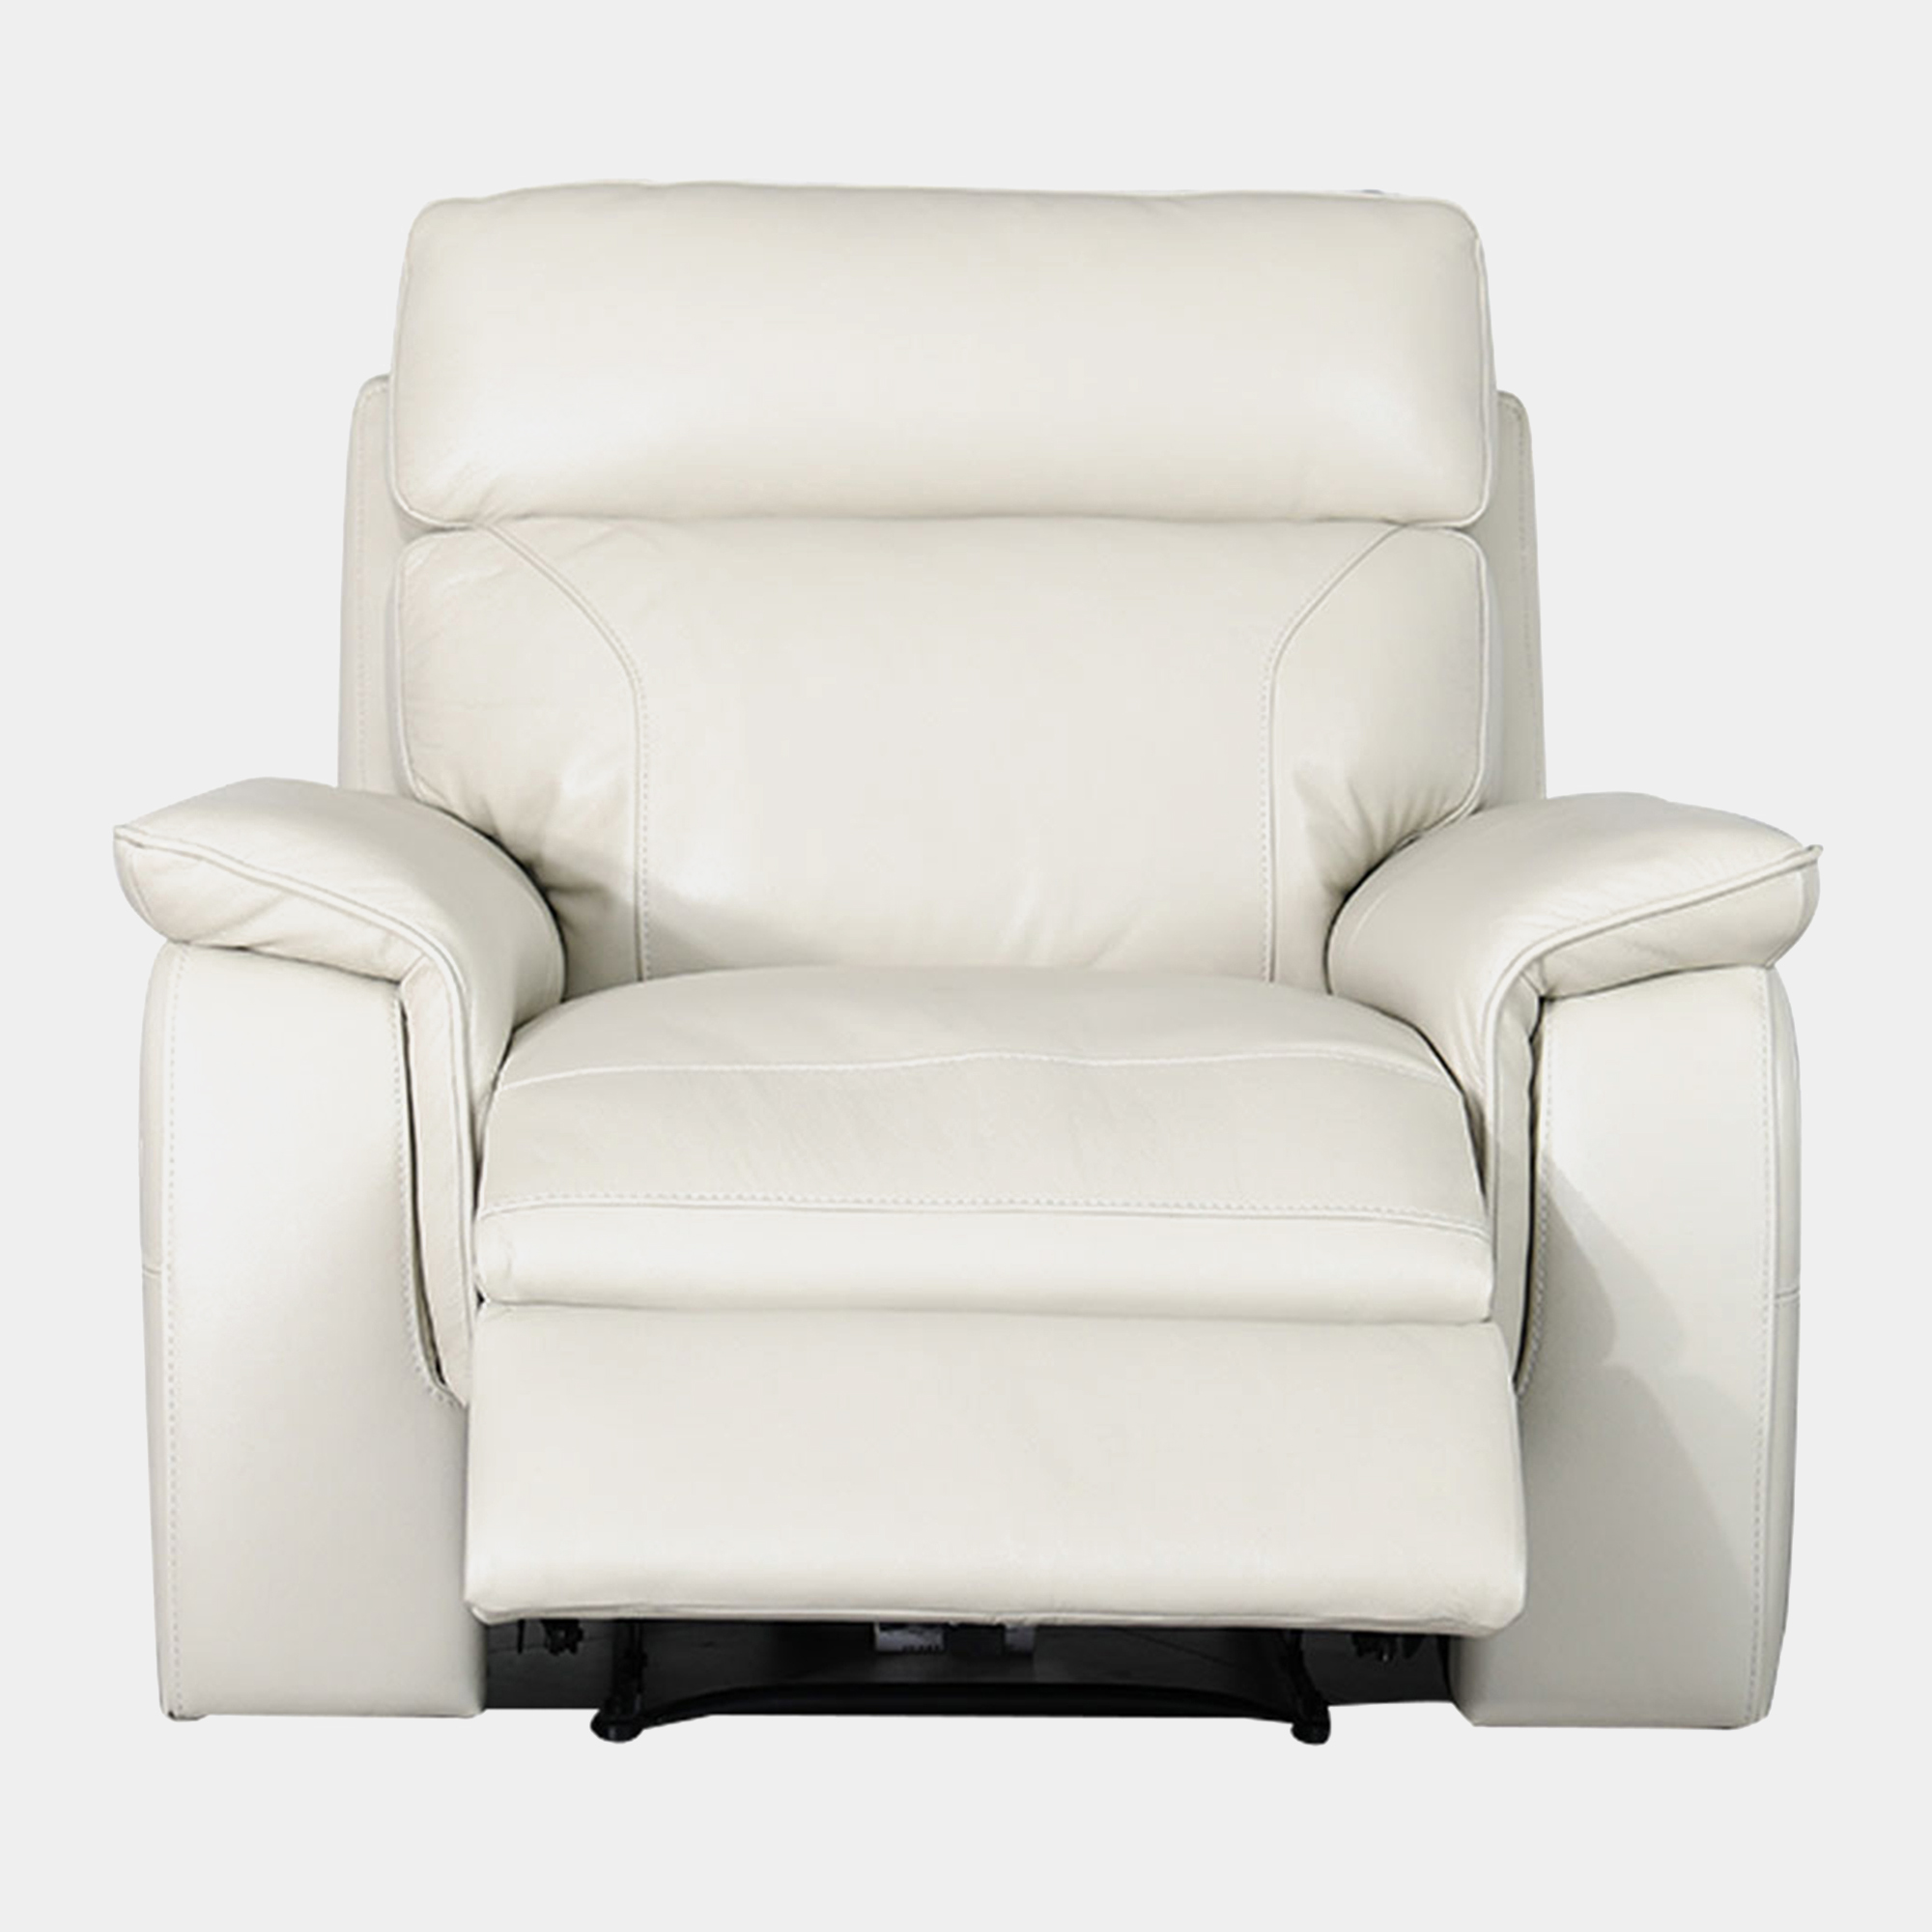 Soro Power Recliner Chair In, Leather Lounger Chair